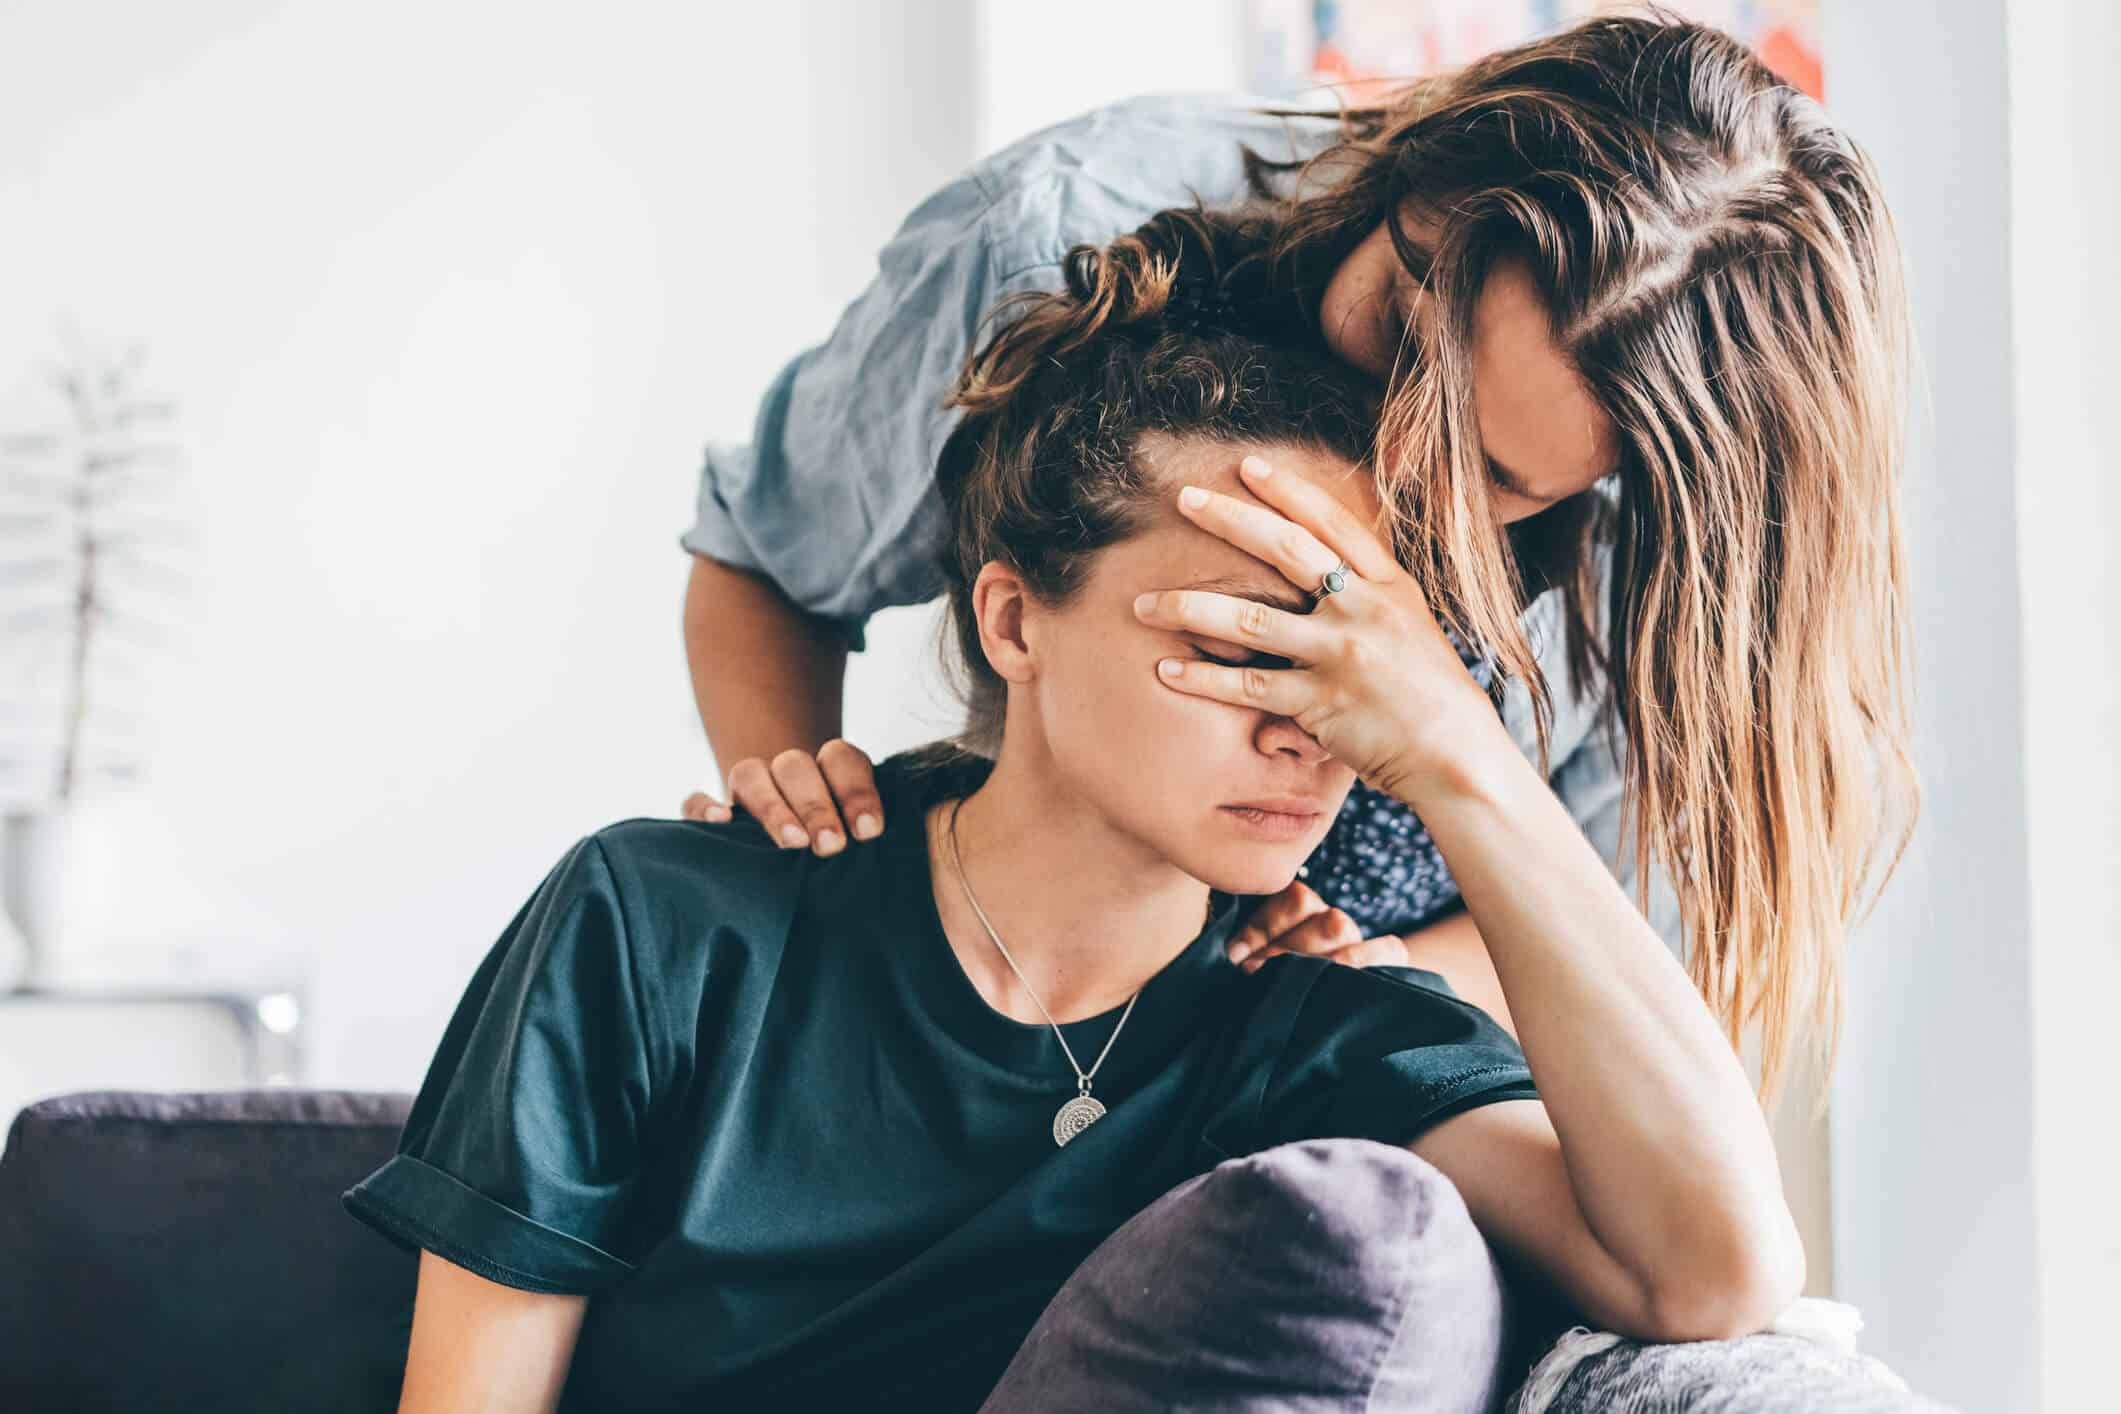 Stressed woman holding her head while sitting on a couch and the other woman kissing her head.